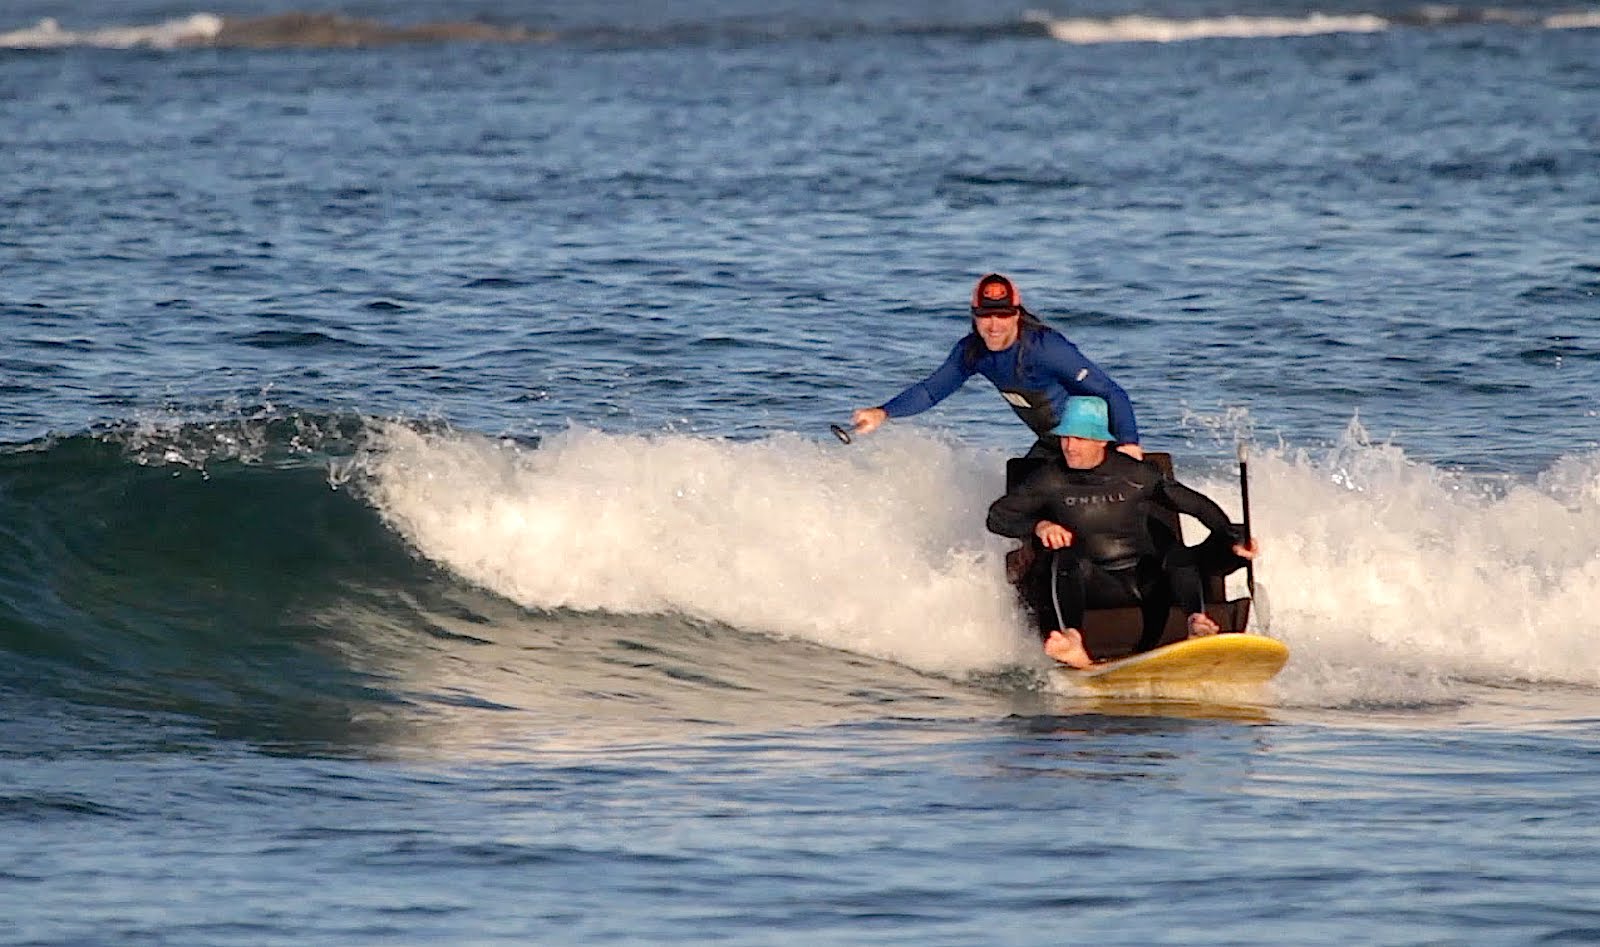 Dogman & Ploon offer us a funny SUP surfing video !